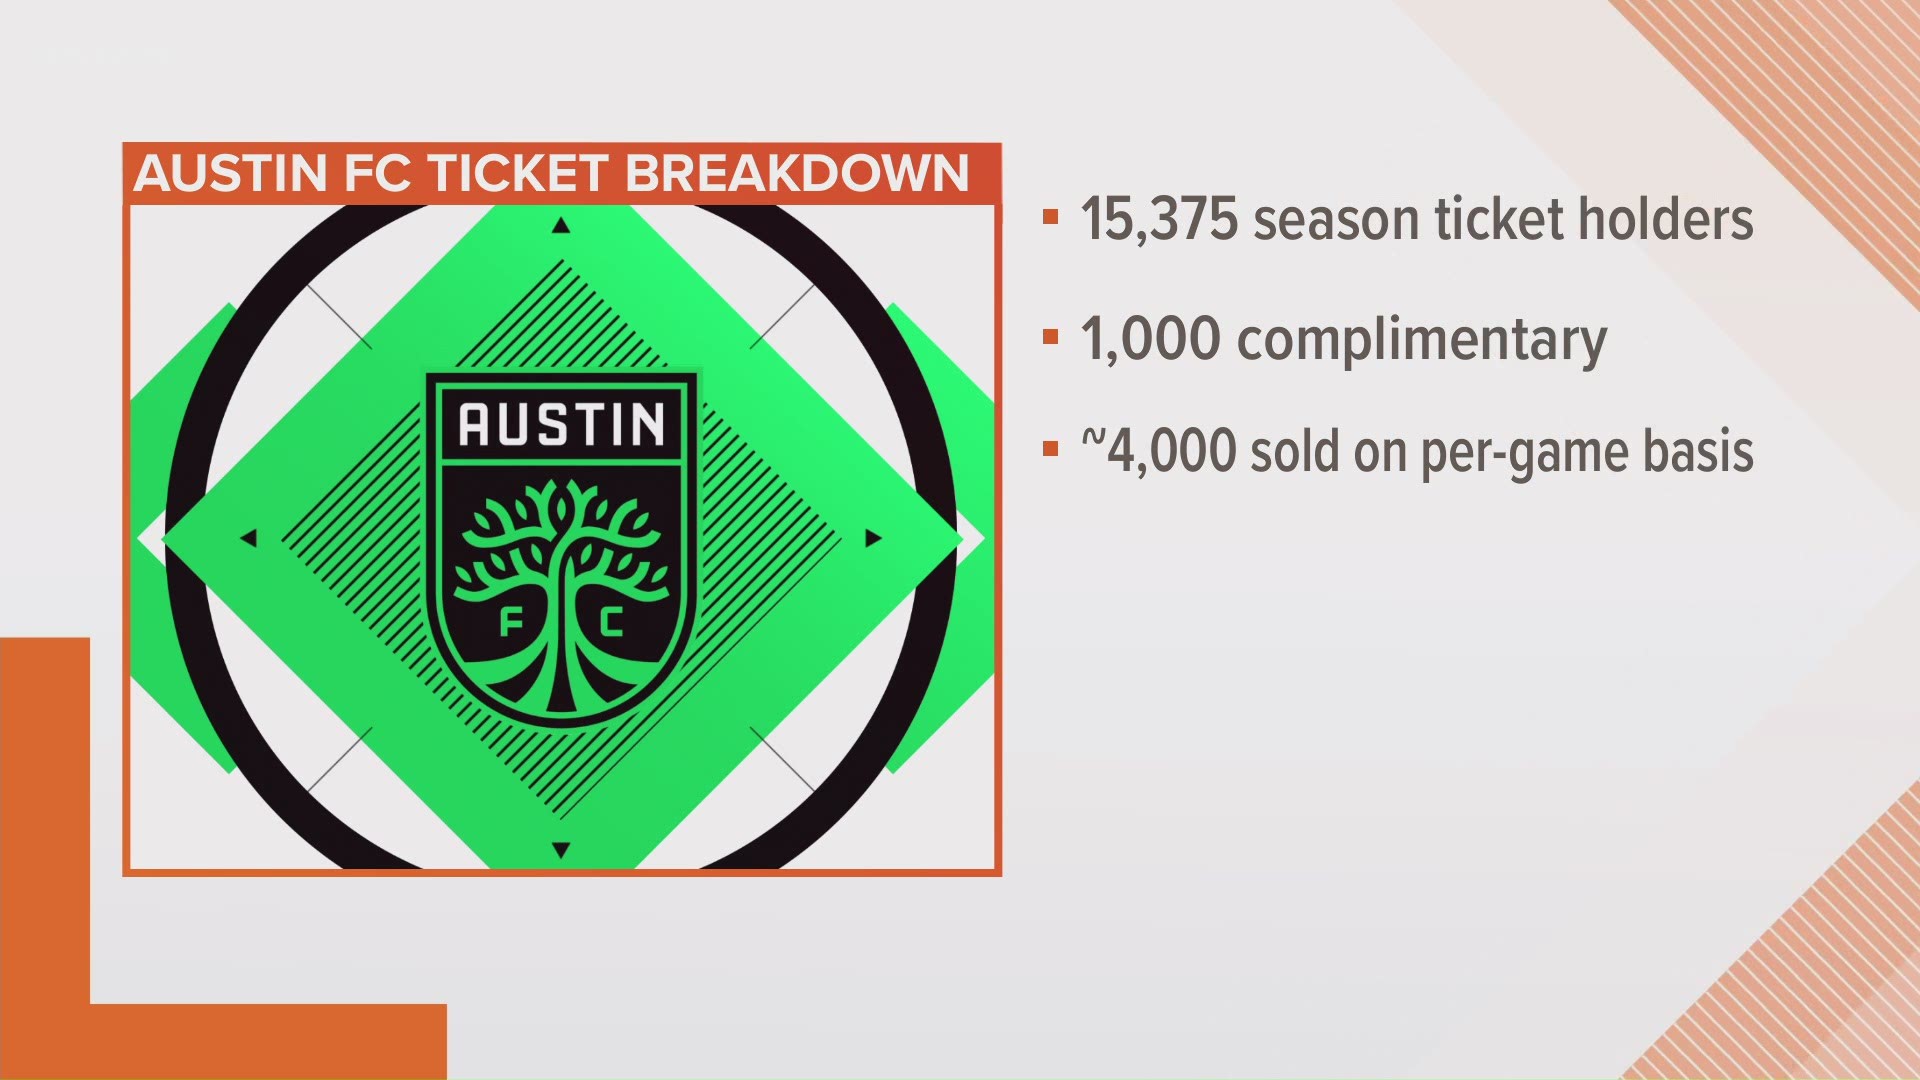 Here’s the order of how tickets will be sold.